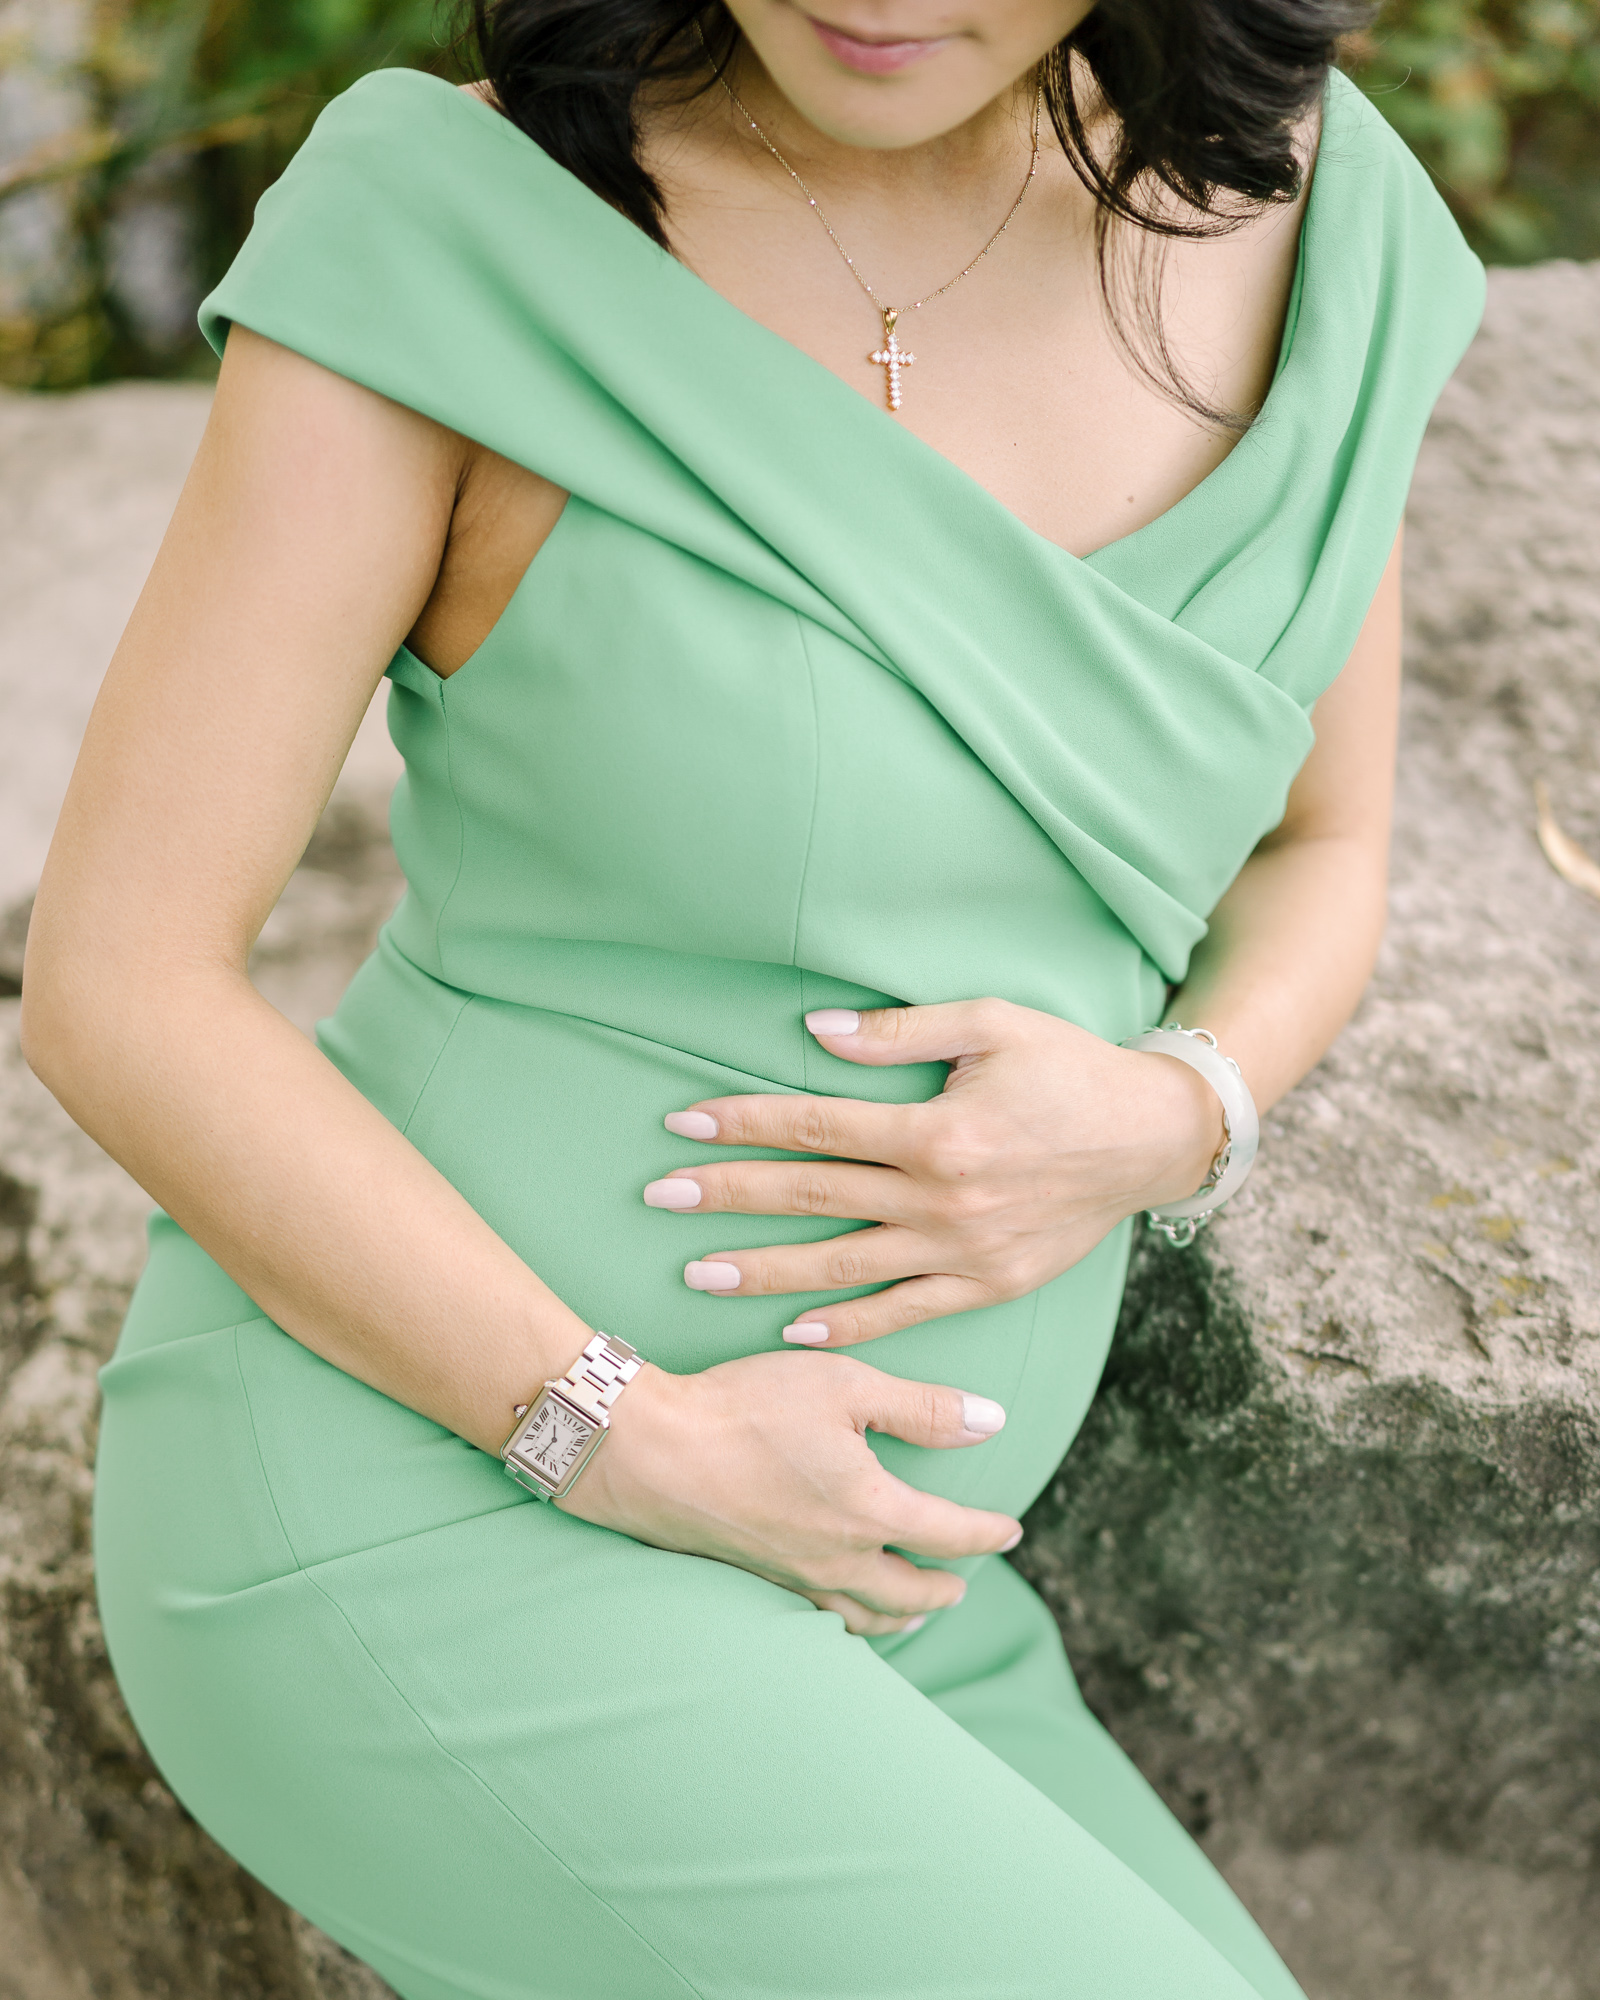 Pregnant woman holding her belly while sitting